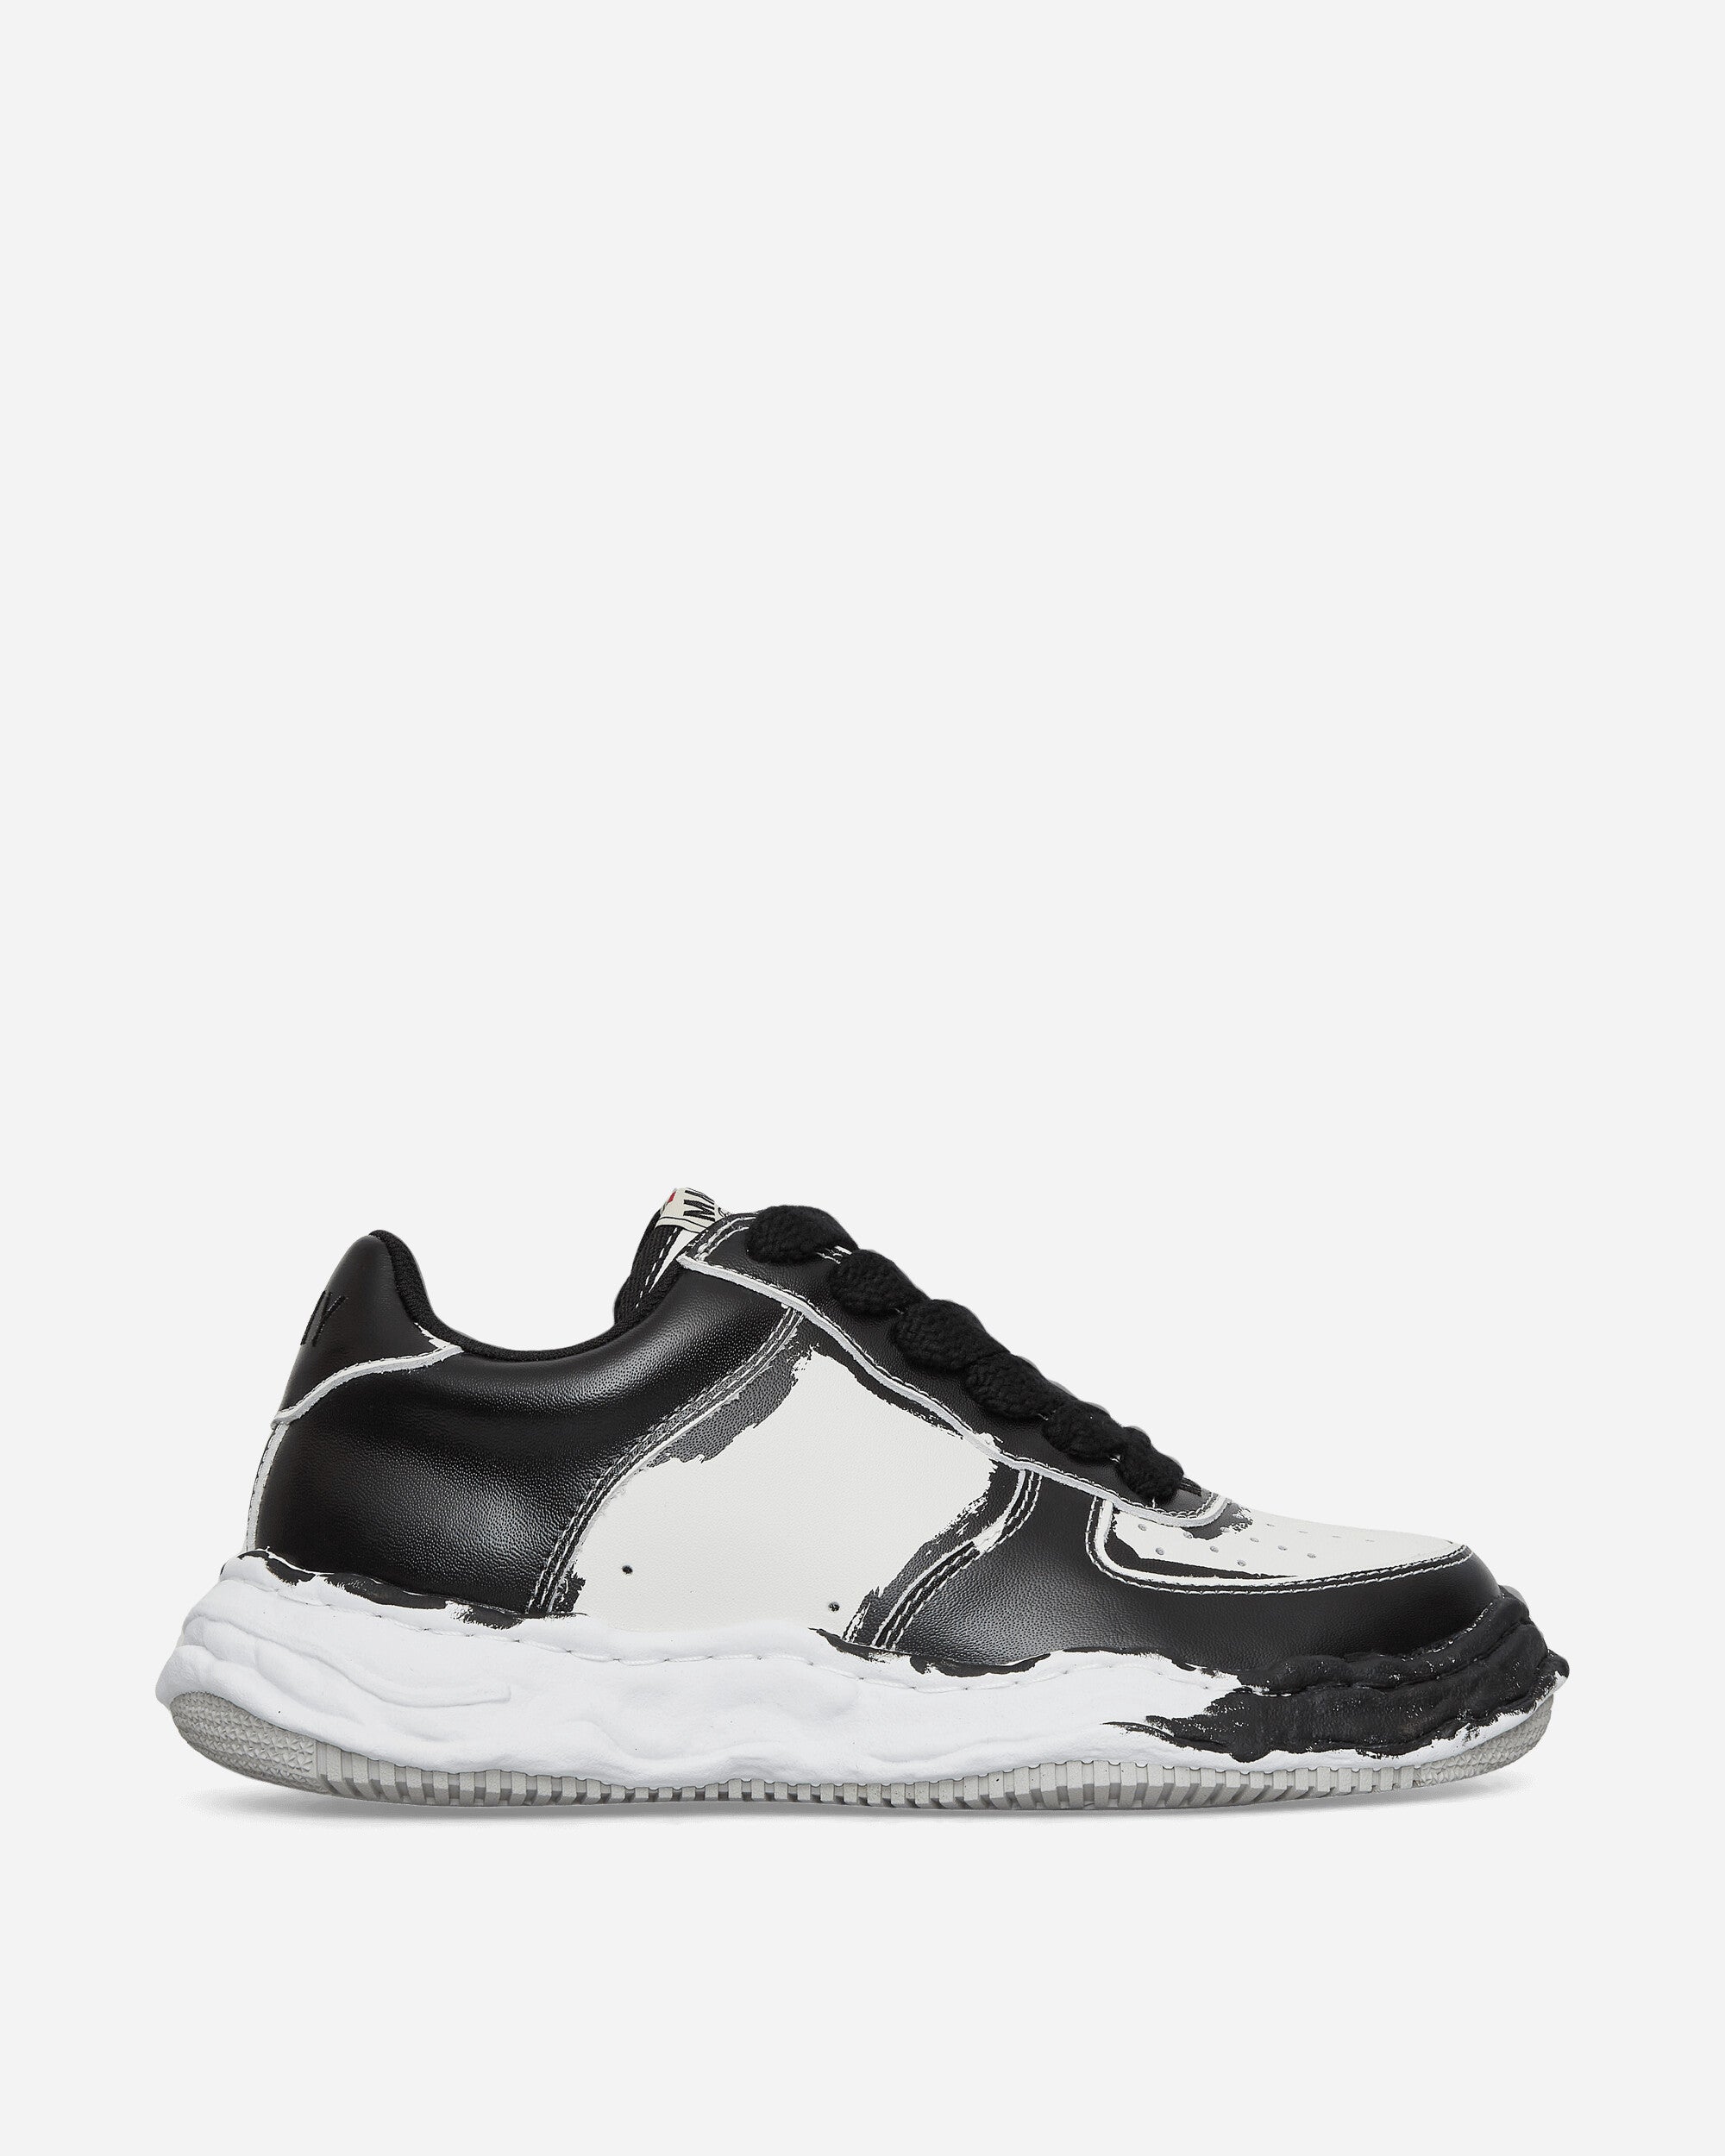 Wayne OG Sole Printed Leather Low Sneakers Black / White